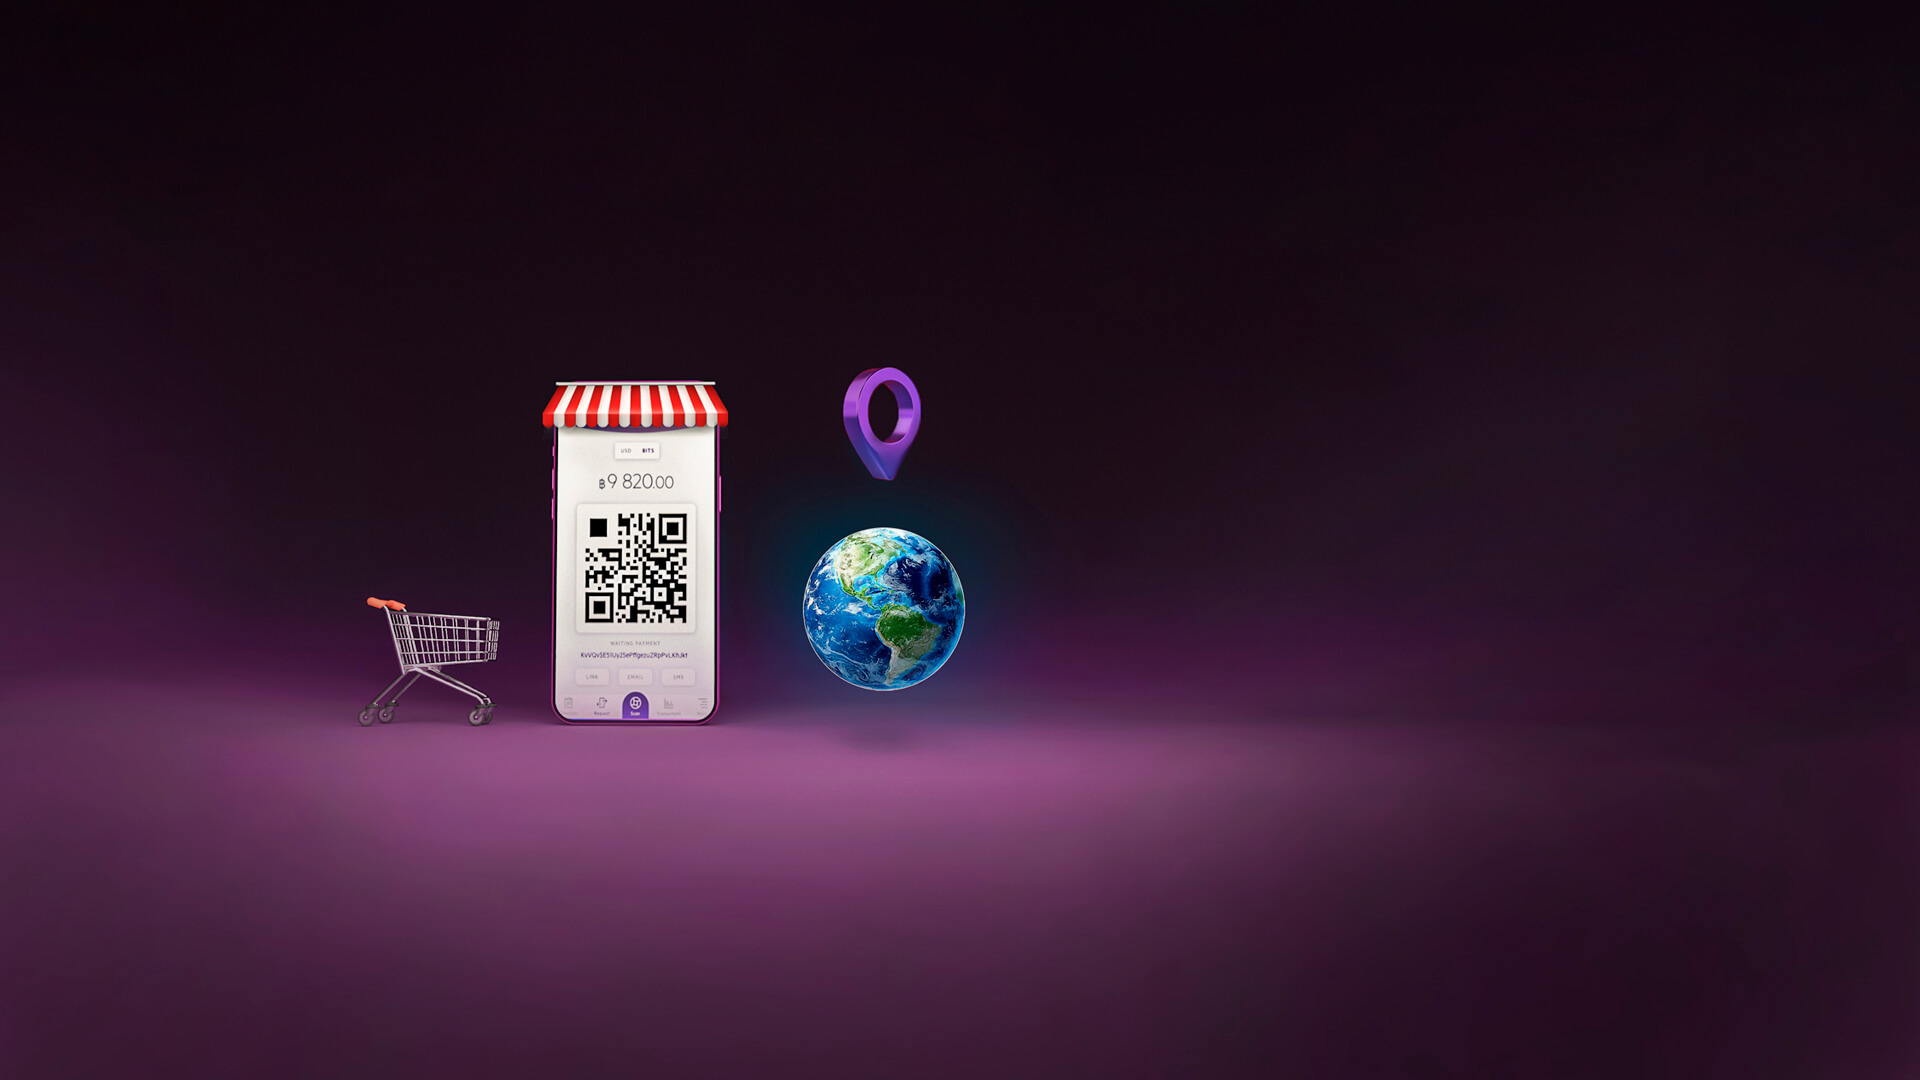 Shopping trolley, mobile payments, globe with pin on top, demonstrating merchant growth opportunities